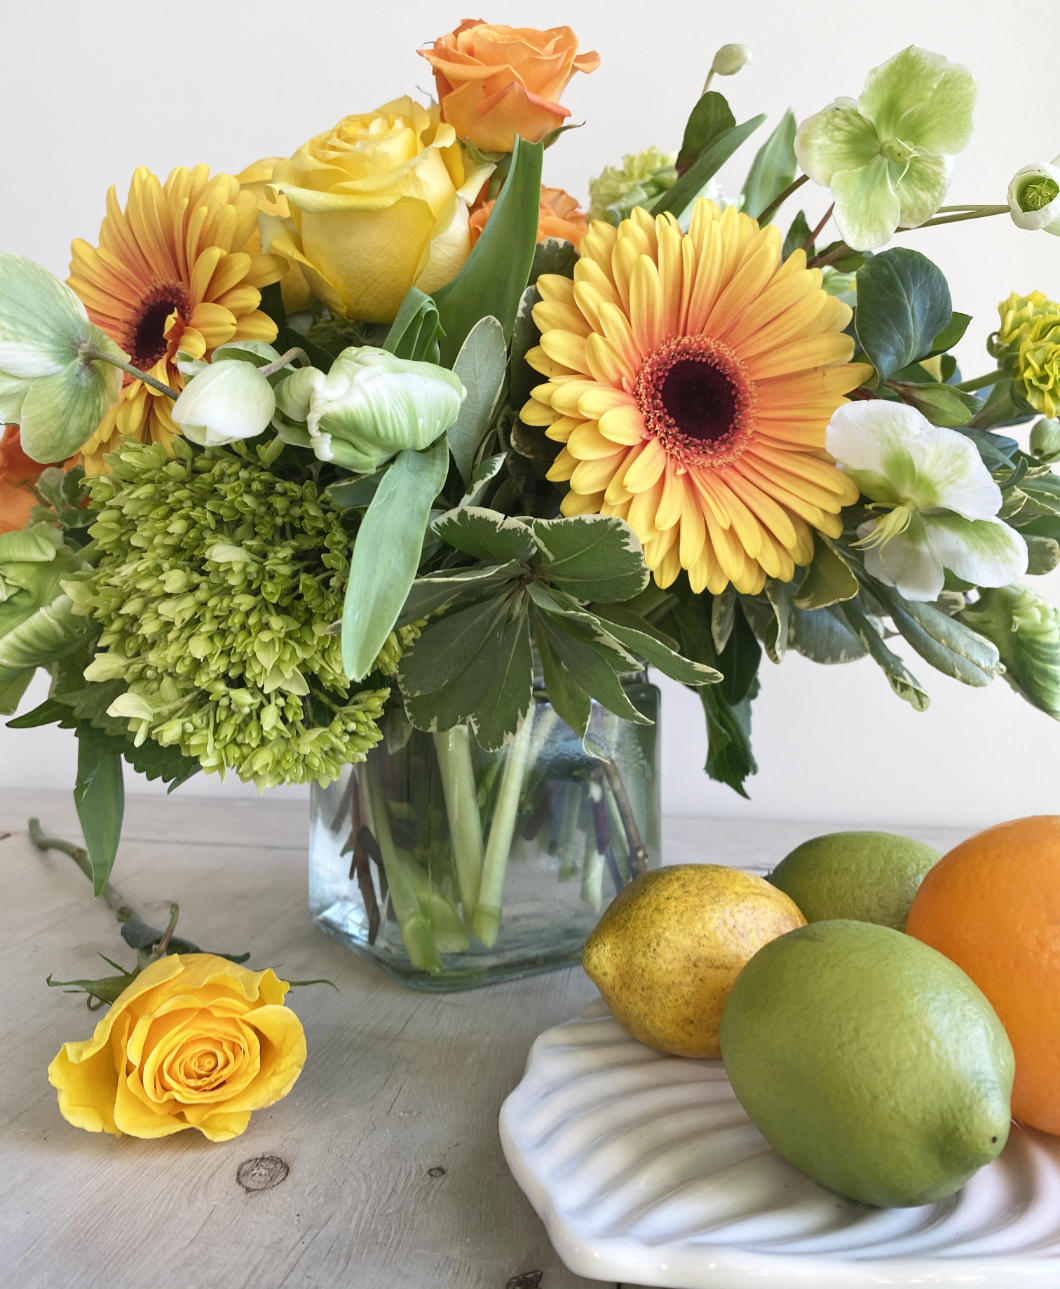 A beautiful citrus toned flower arrangement. A mix of lemon, limes, bright oranges, and stunning yellows. The arrangement features green Hellebore, green and white Parrot Tulips, orange crush Spray Roses, Kiwi Hydrangea, and large two-toned Gerbera Daisys. In a clear glass cylinder. next to it, a plate with lemons and limes, and there is a yellow rose over the table